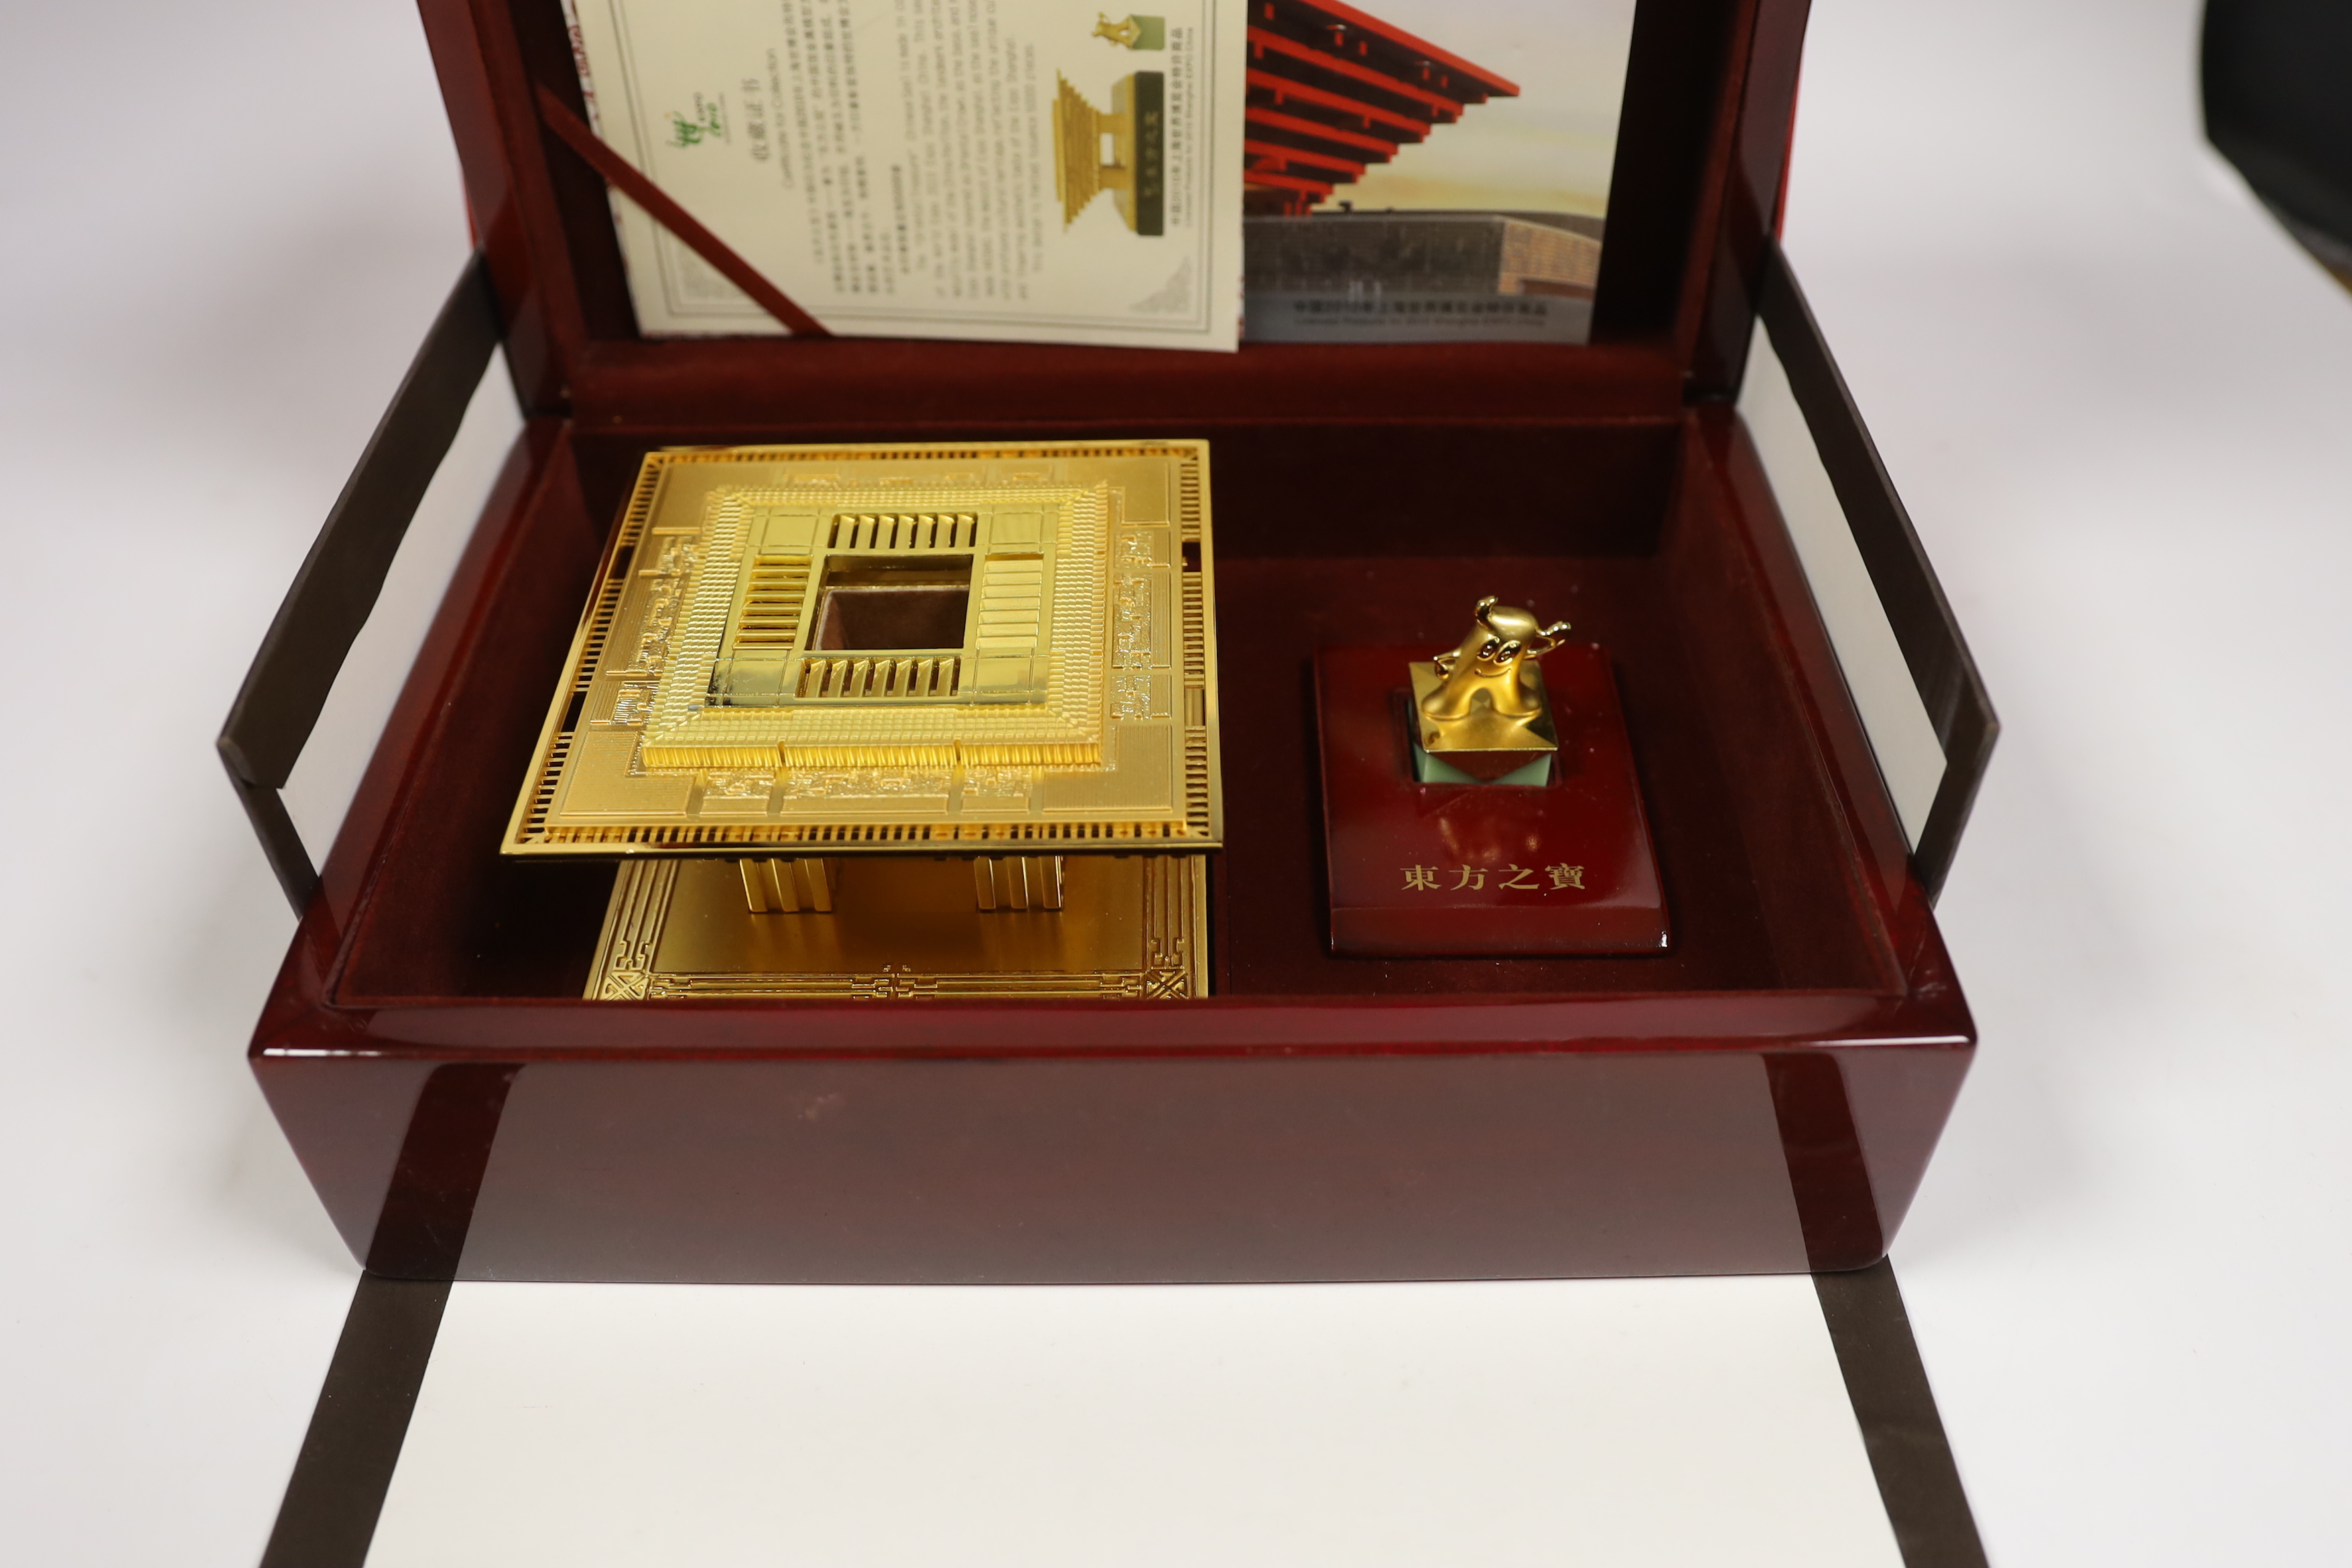 A cased Chinese Shanghai Expo 2010 model in gilt metal, 10cm high